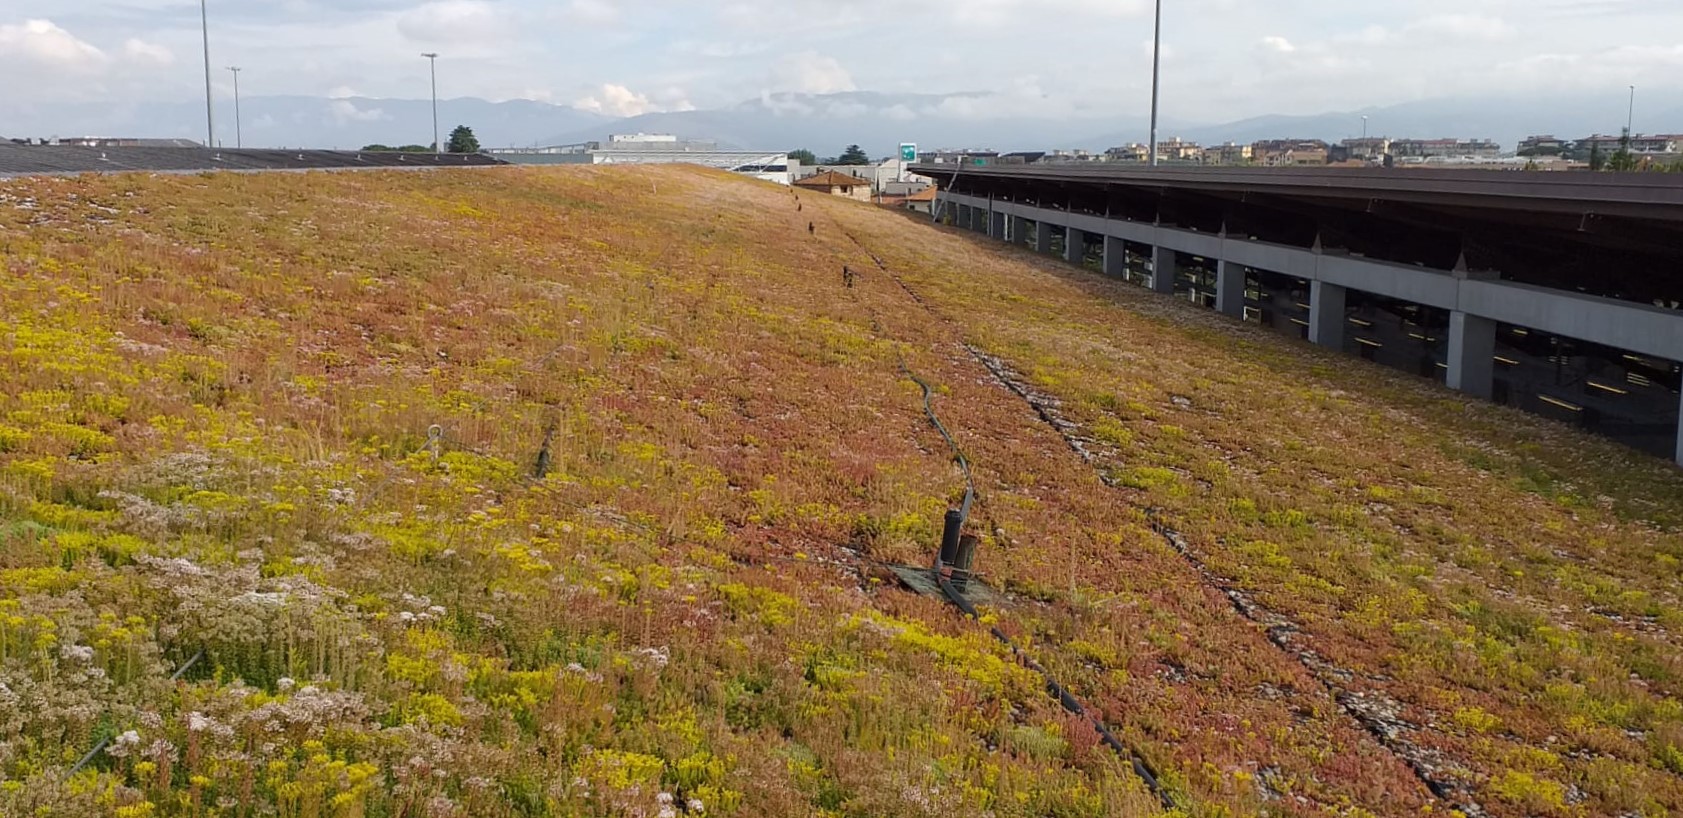 Green roof at tramway depot in Scandicci (FI)